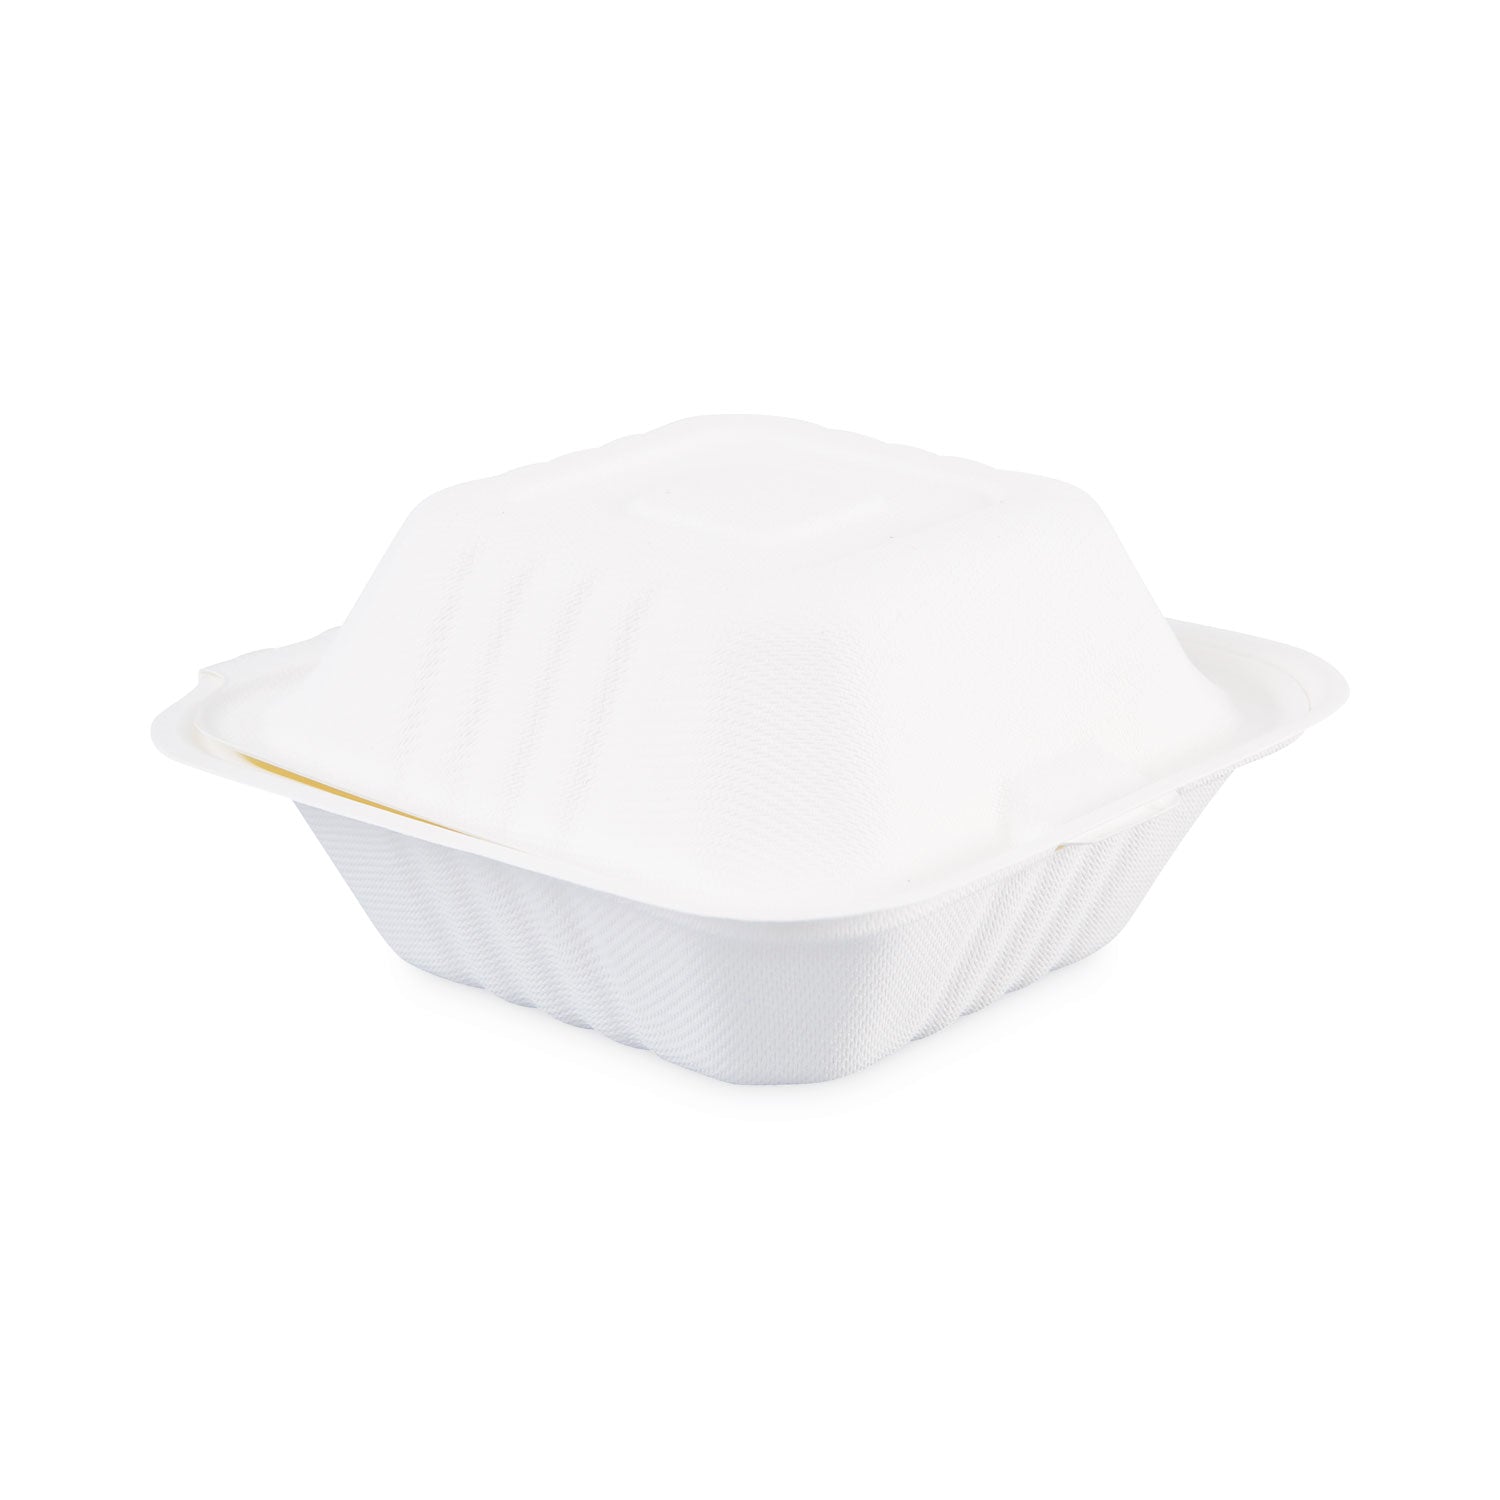 bagasse-food-containers-hinged-lid-1-compartment-6-x-6-x-319-white-sugarcane-125-sleeve-4-sleeves-carton_bwkhingewf1cm6 - 2